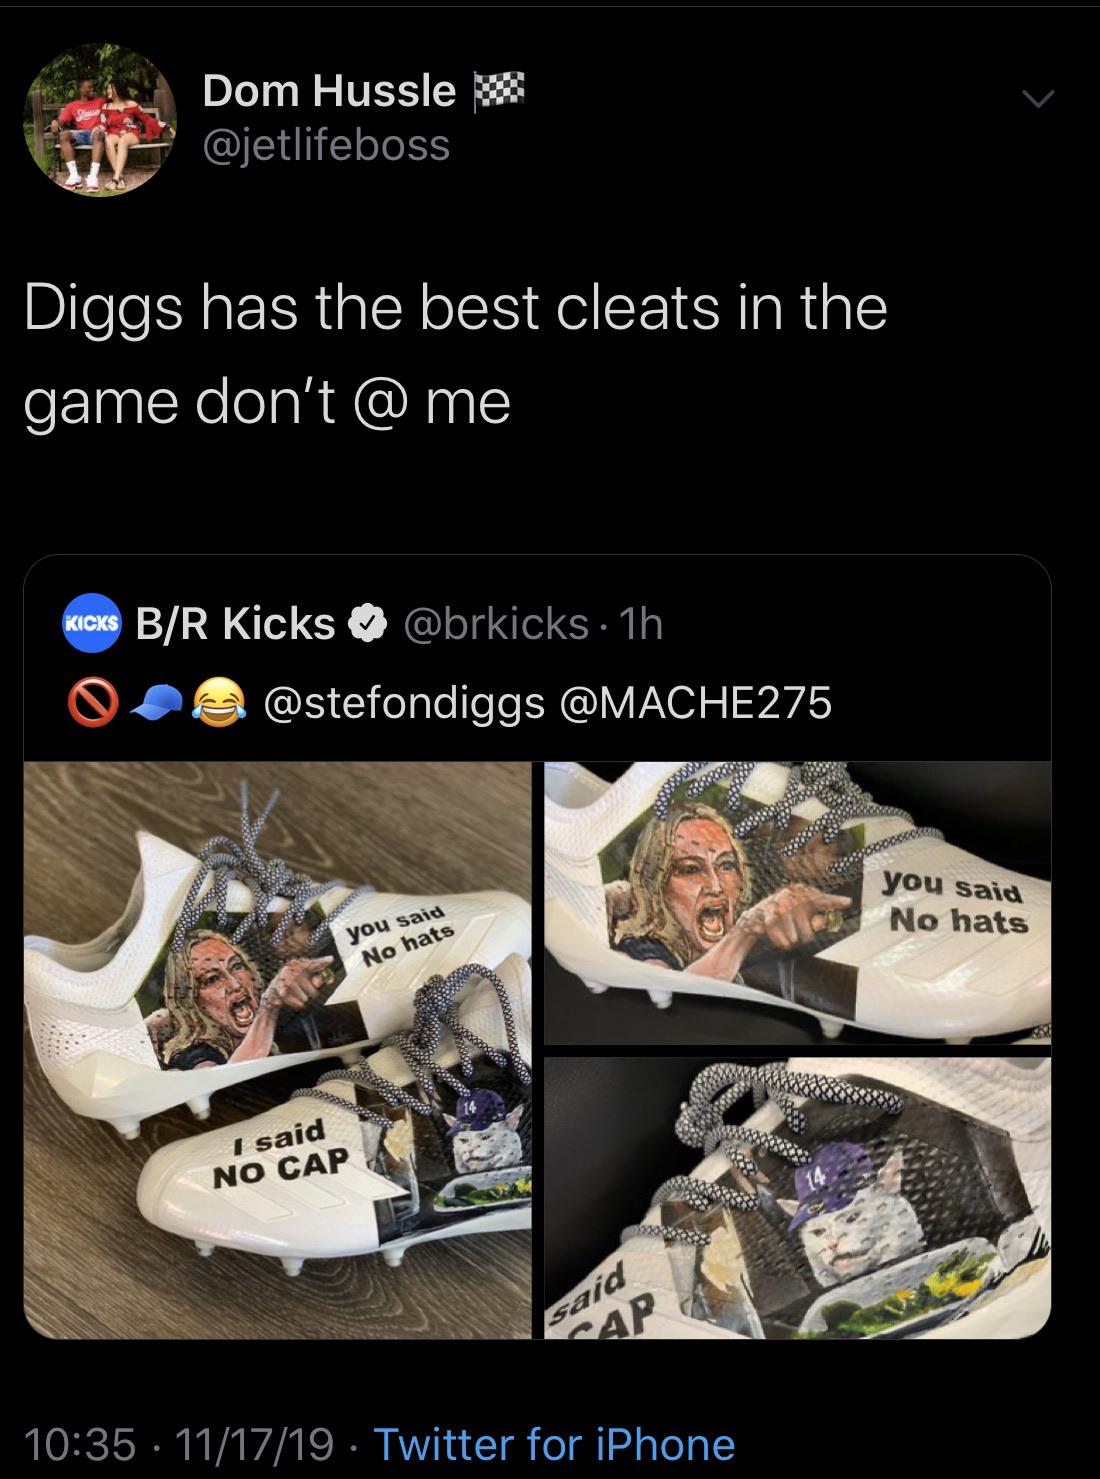 Dom Hussle Diggs has the best cleats in the game don't @ me Kicks BR Kicks 1h oce you said No hats you said No hats Wxxx I said No Cap said 111719 Twitter for iPhone